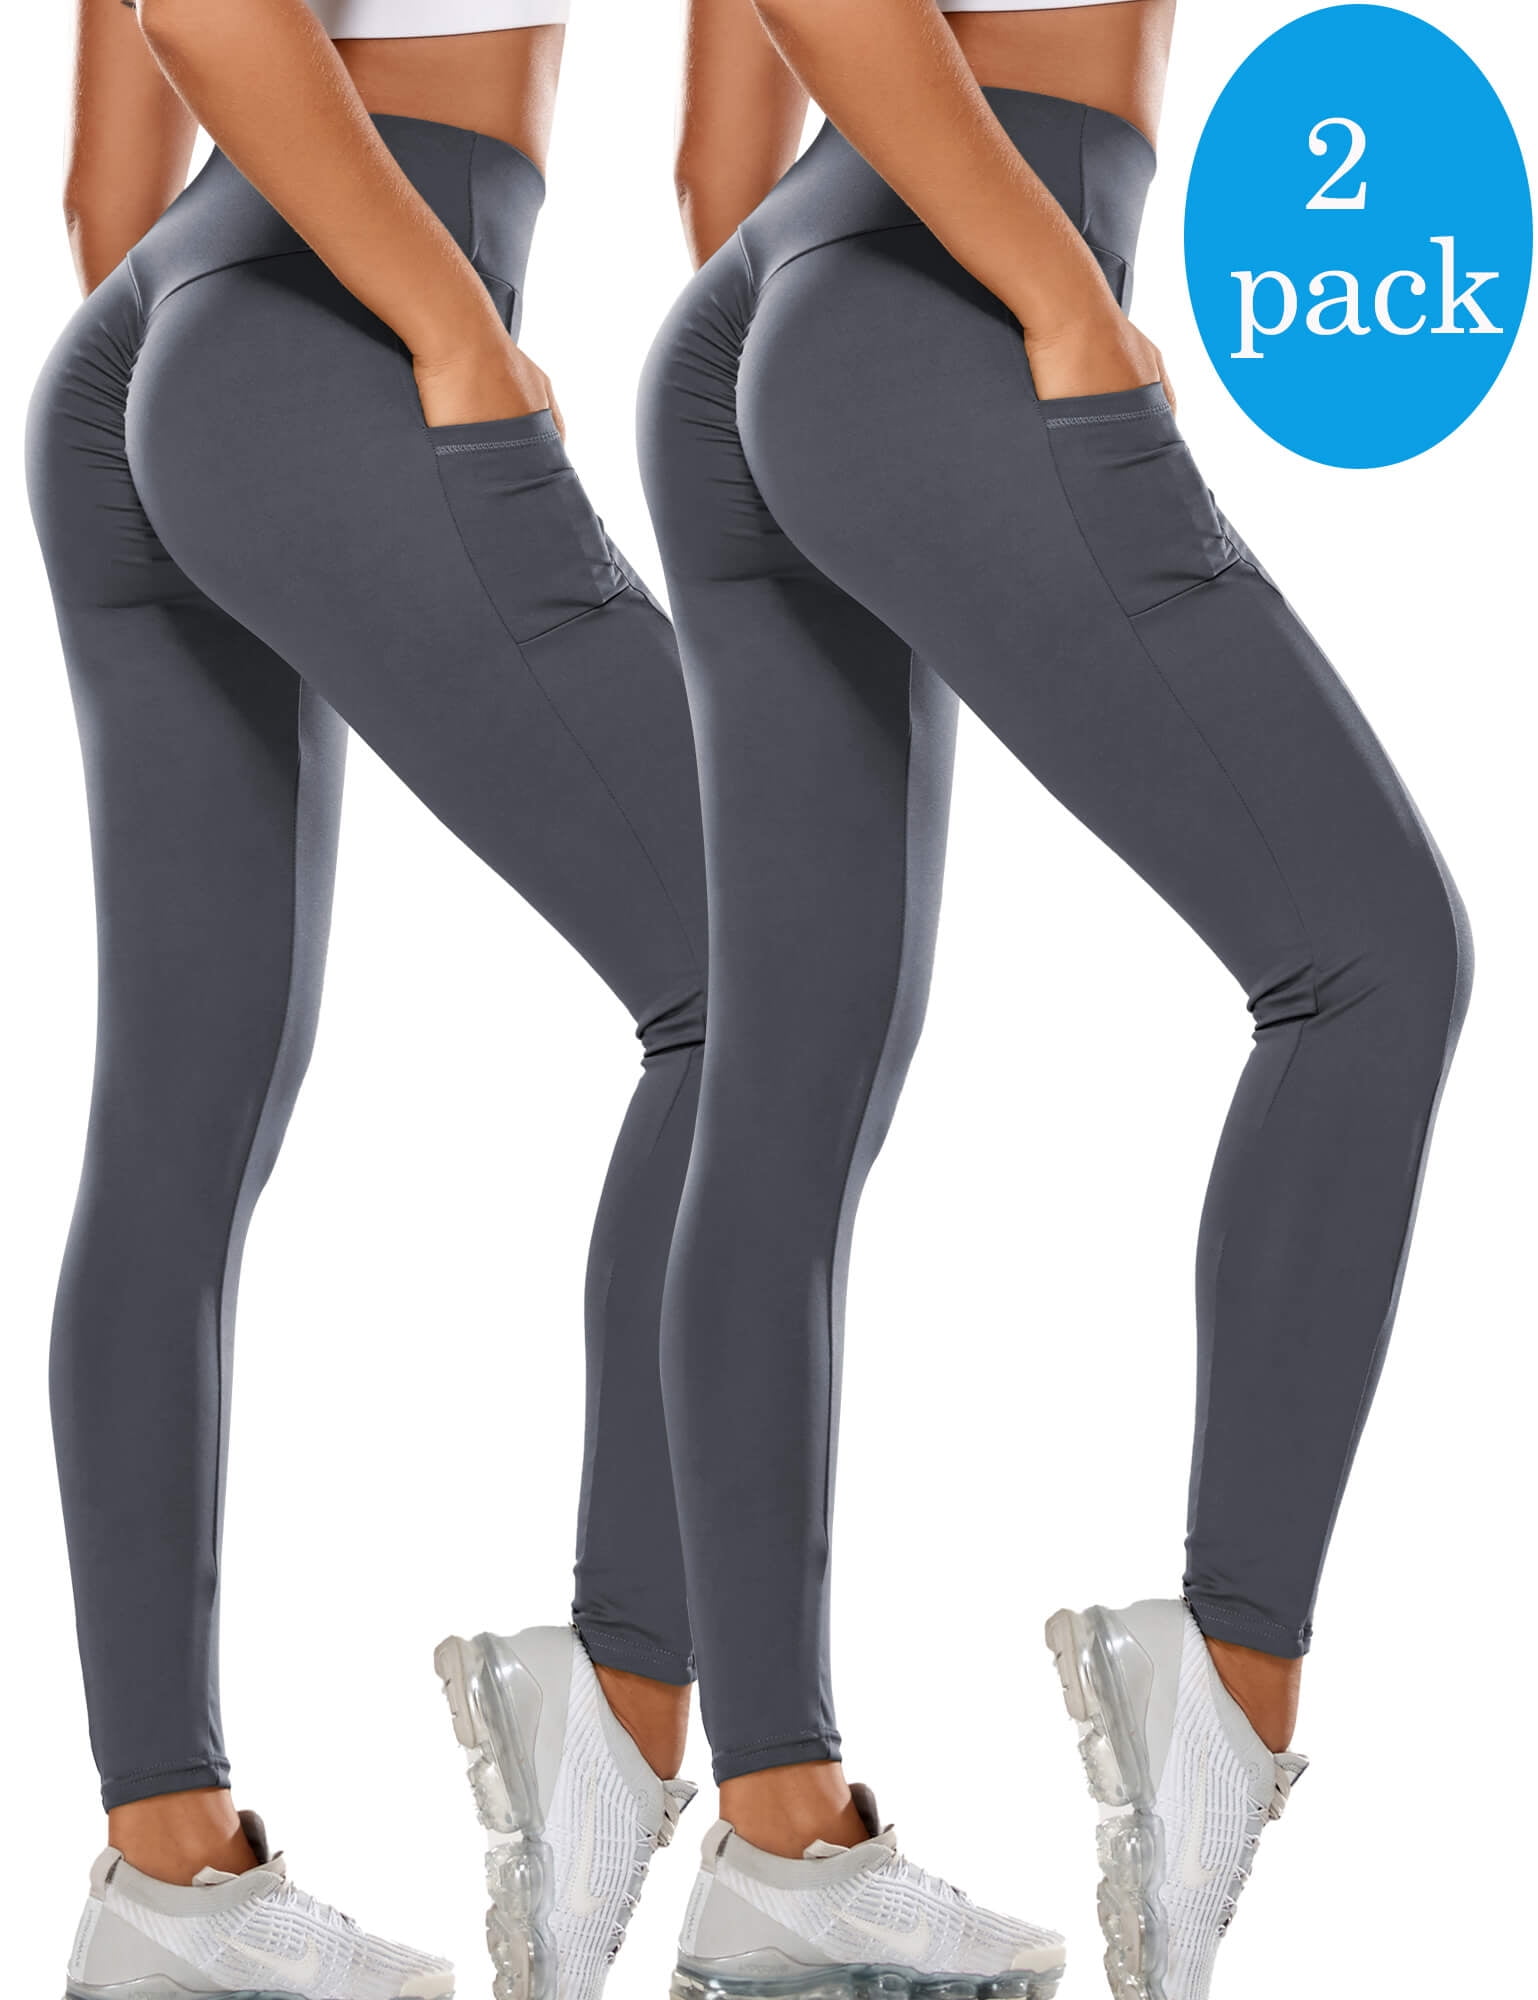 MANIFIQUE 2 Packs Workout Leggings for Women with Pockets Scrunch